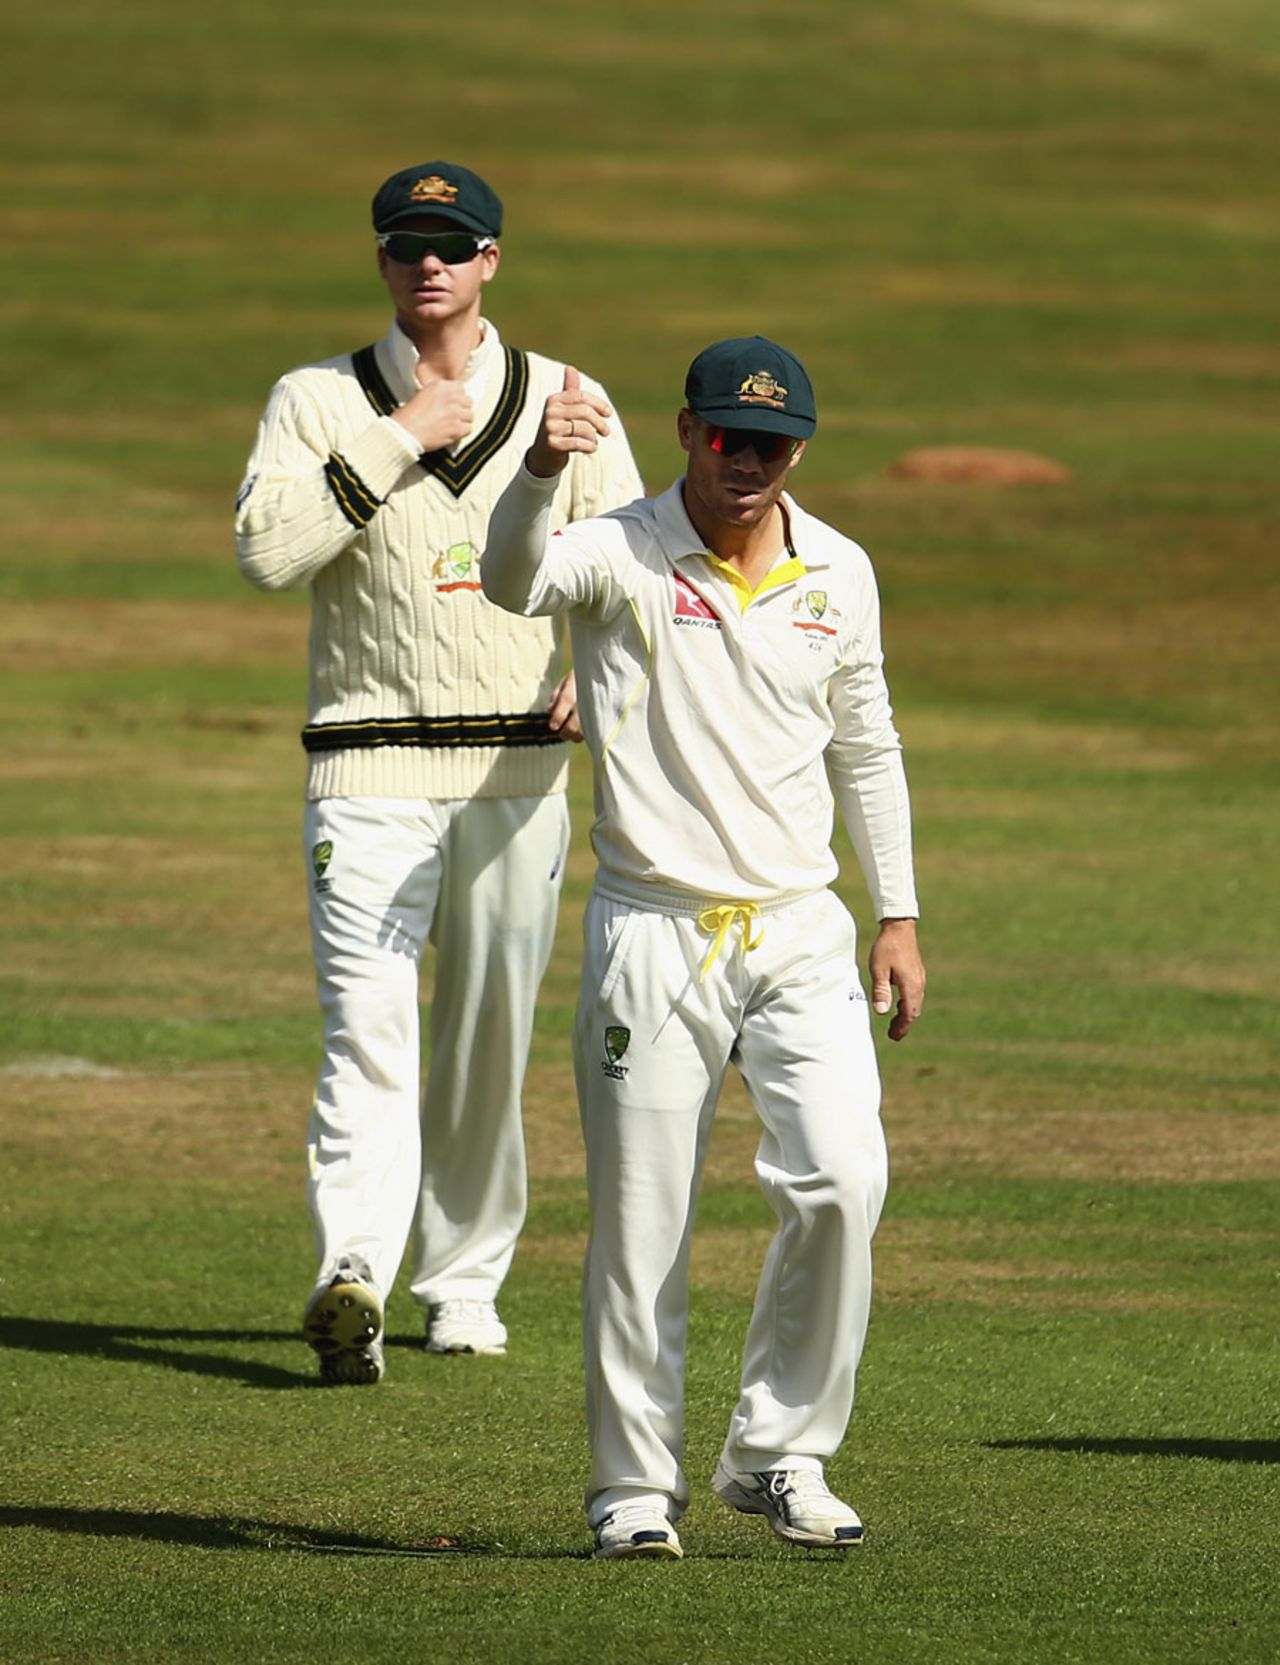 Steven Smith and David Warner took the field as captain and vice-captain, Northamptonshire v Australians, Tour match, Northampton, 2nd day, August 15, 2015